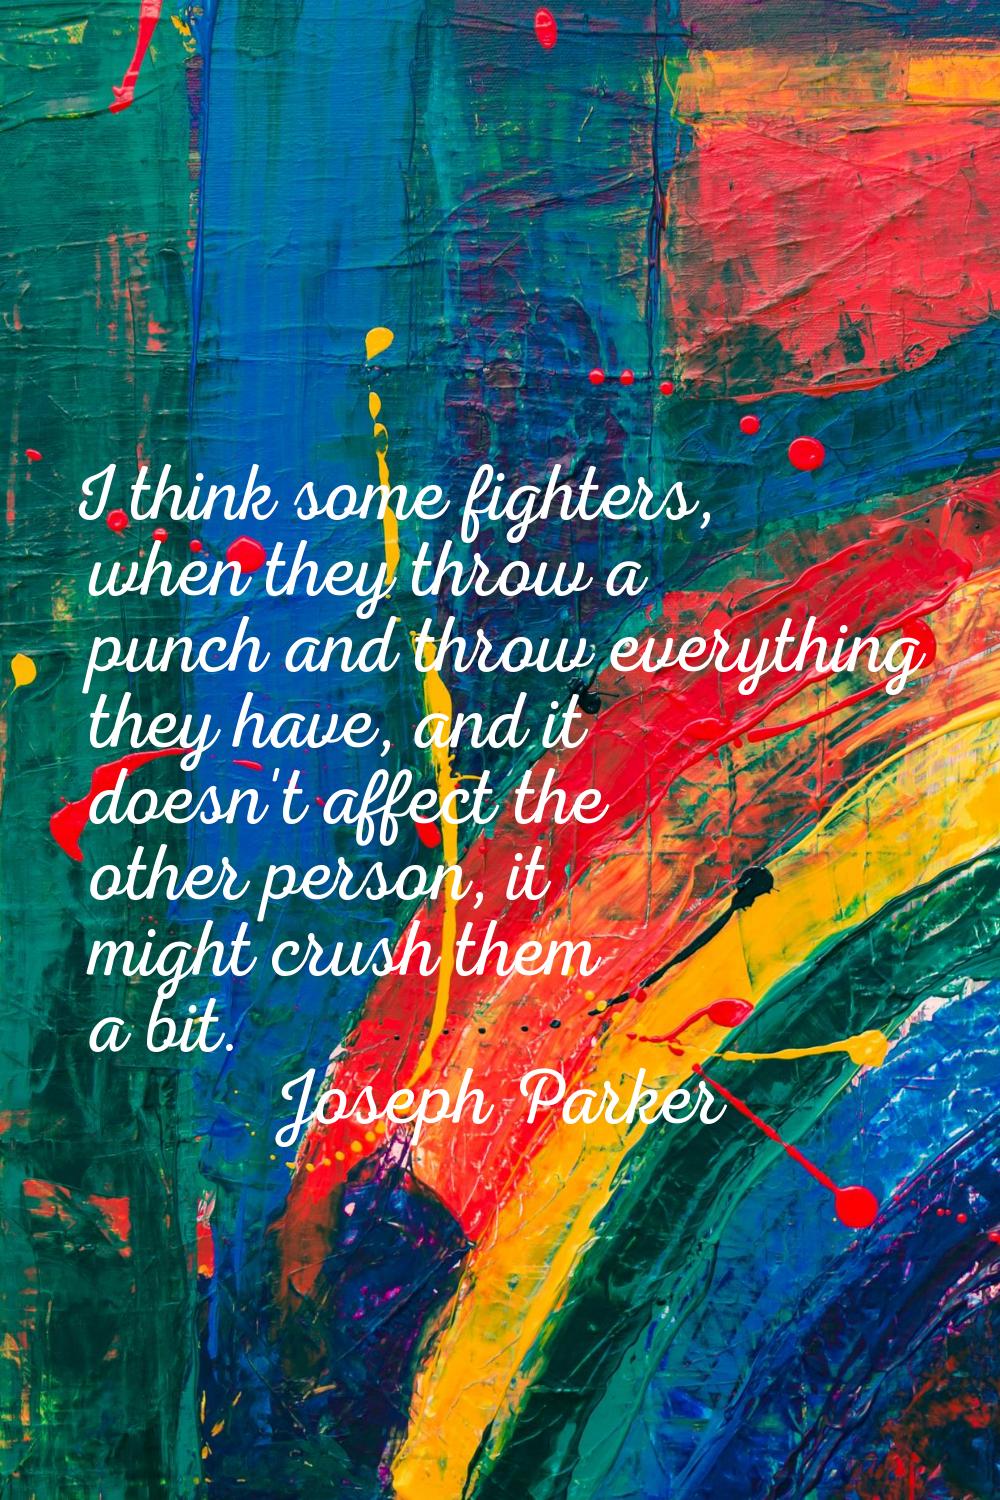 I think some fighters, when they throw a punch and throw everything they have, and it doesn't affec